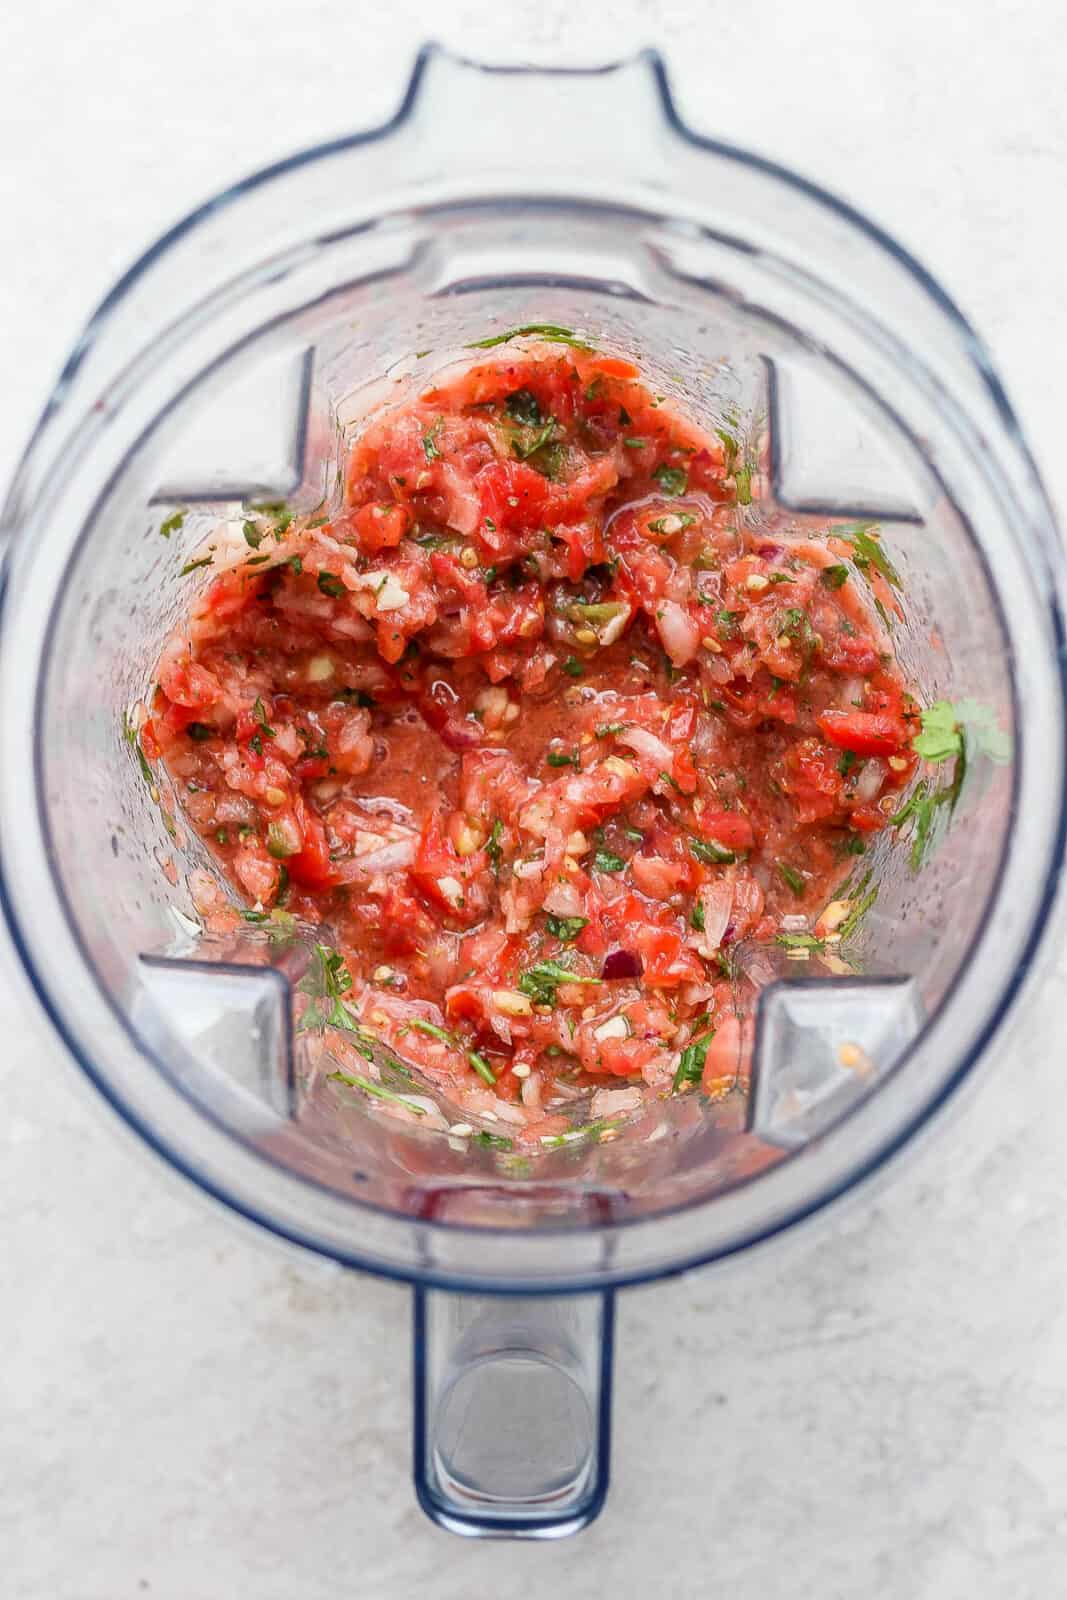 Top view of blender with salsa inside. 